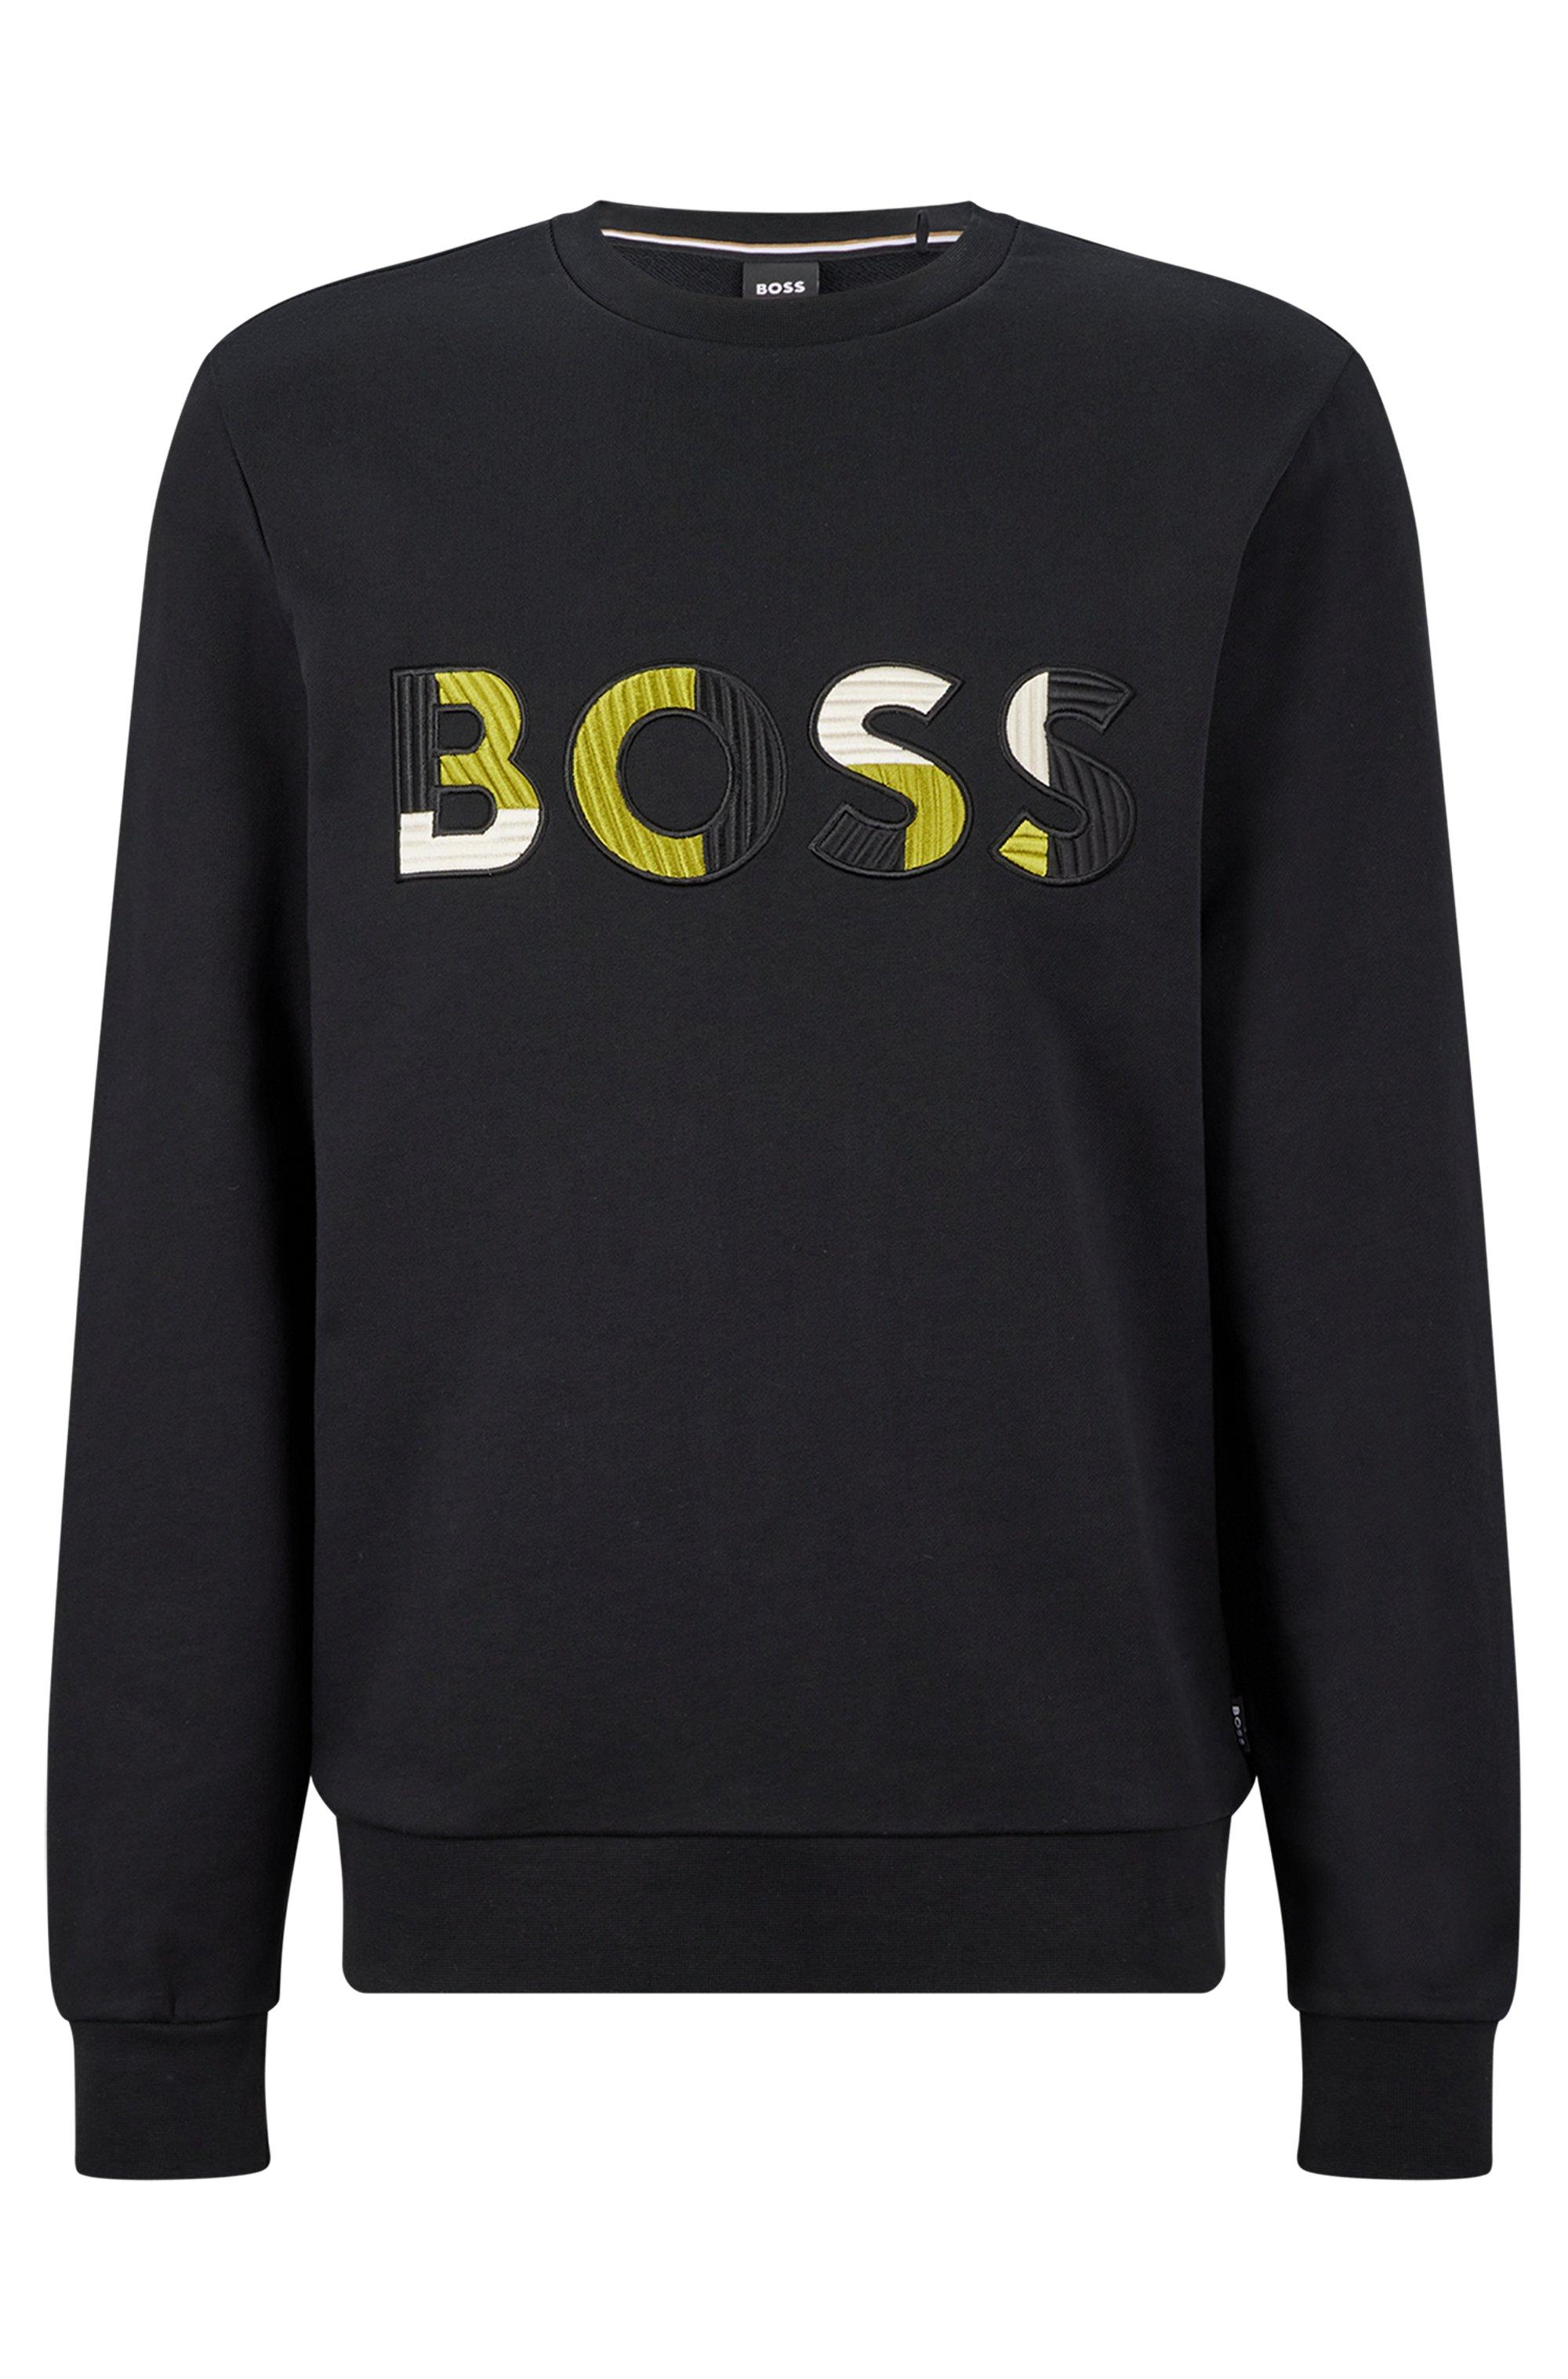 BOSS by HUGO BOSS Cotton Boss Logo Printed Crewneck Sweatshirt in Black for Men Mens Clothing Activewear gym and workout clothes Sweatshirts 